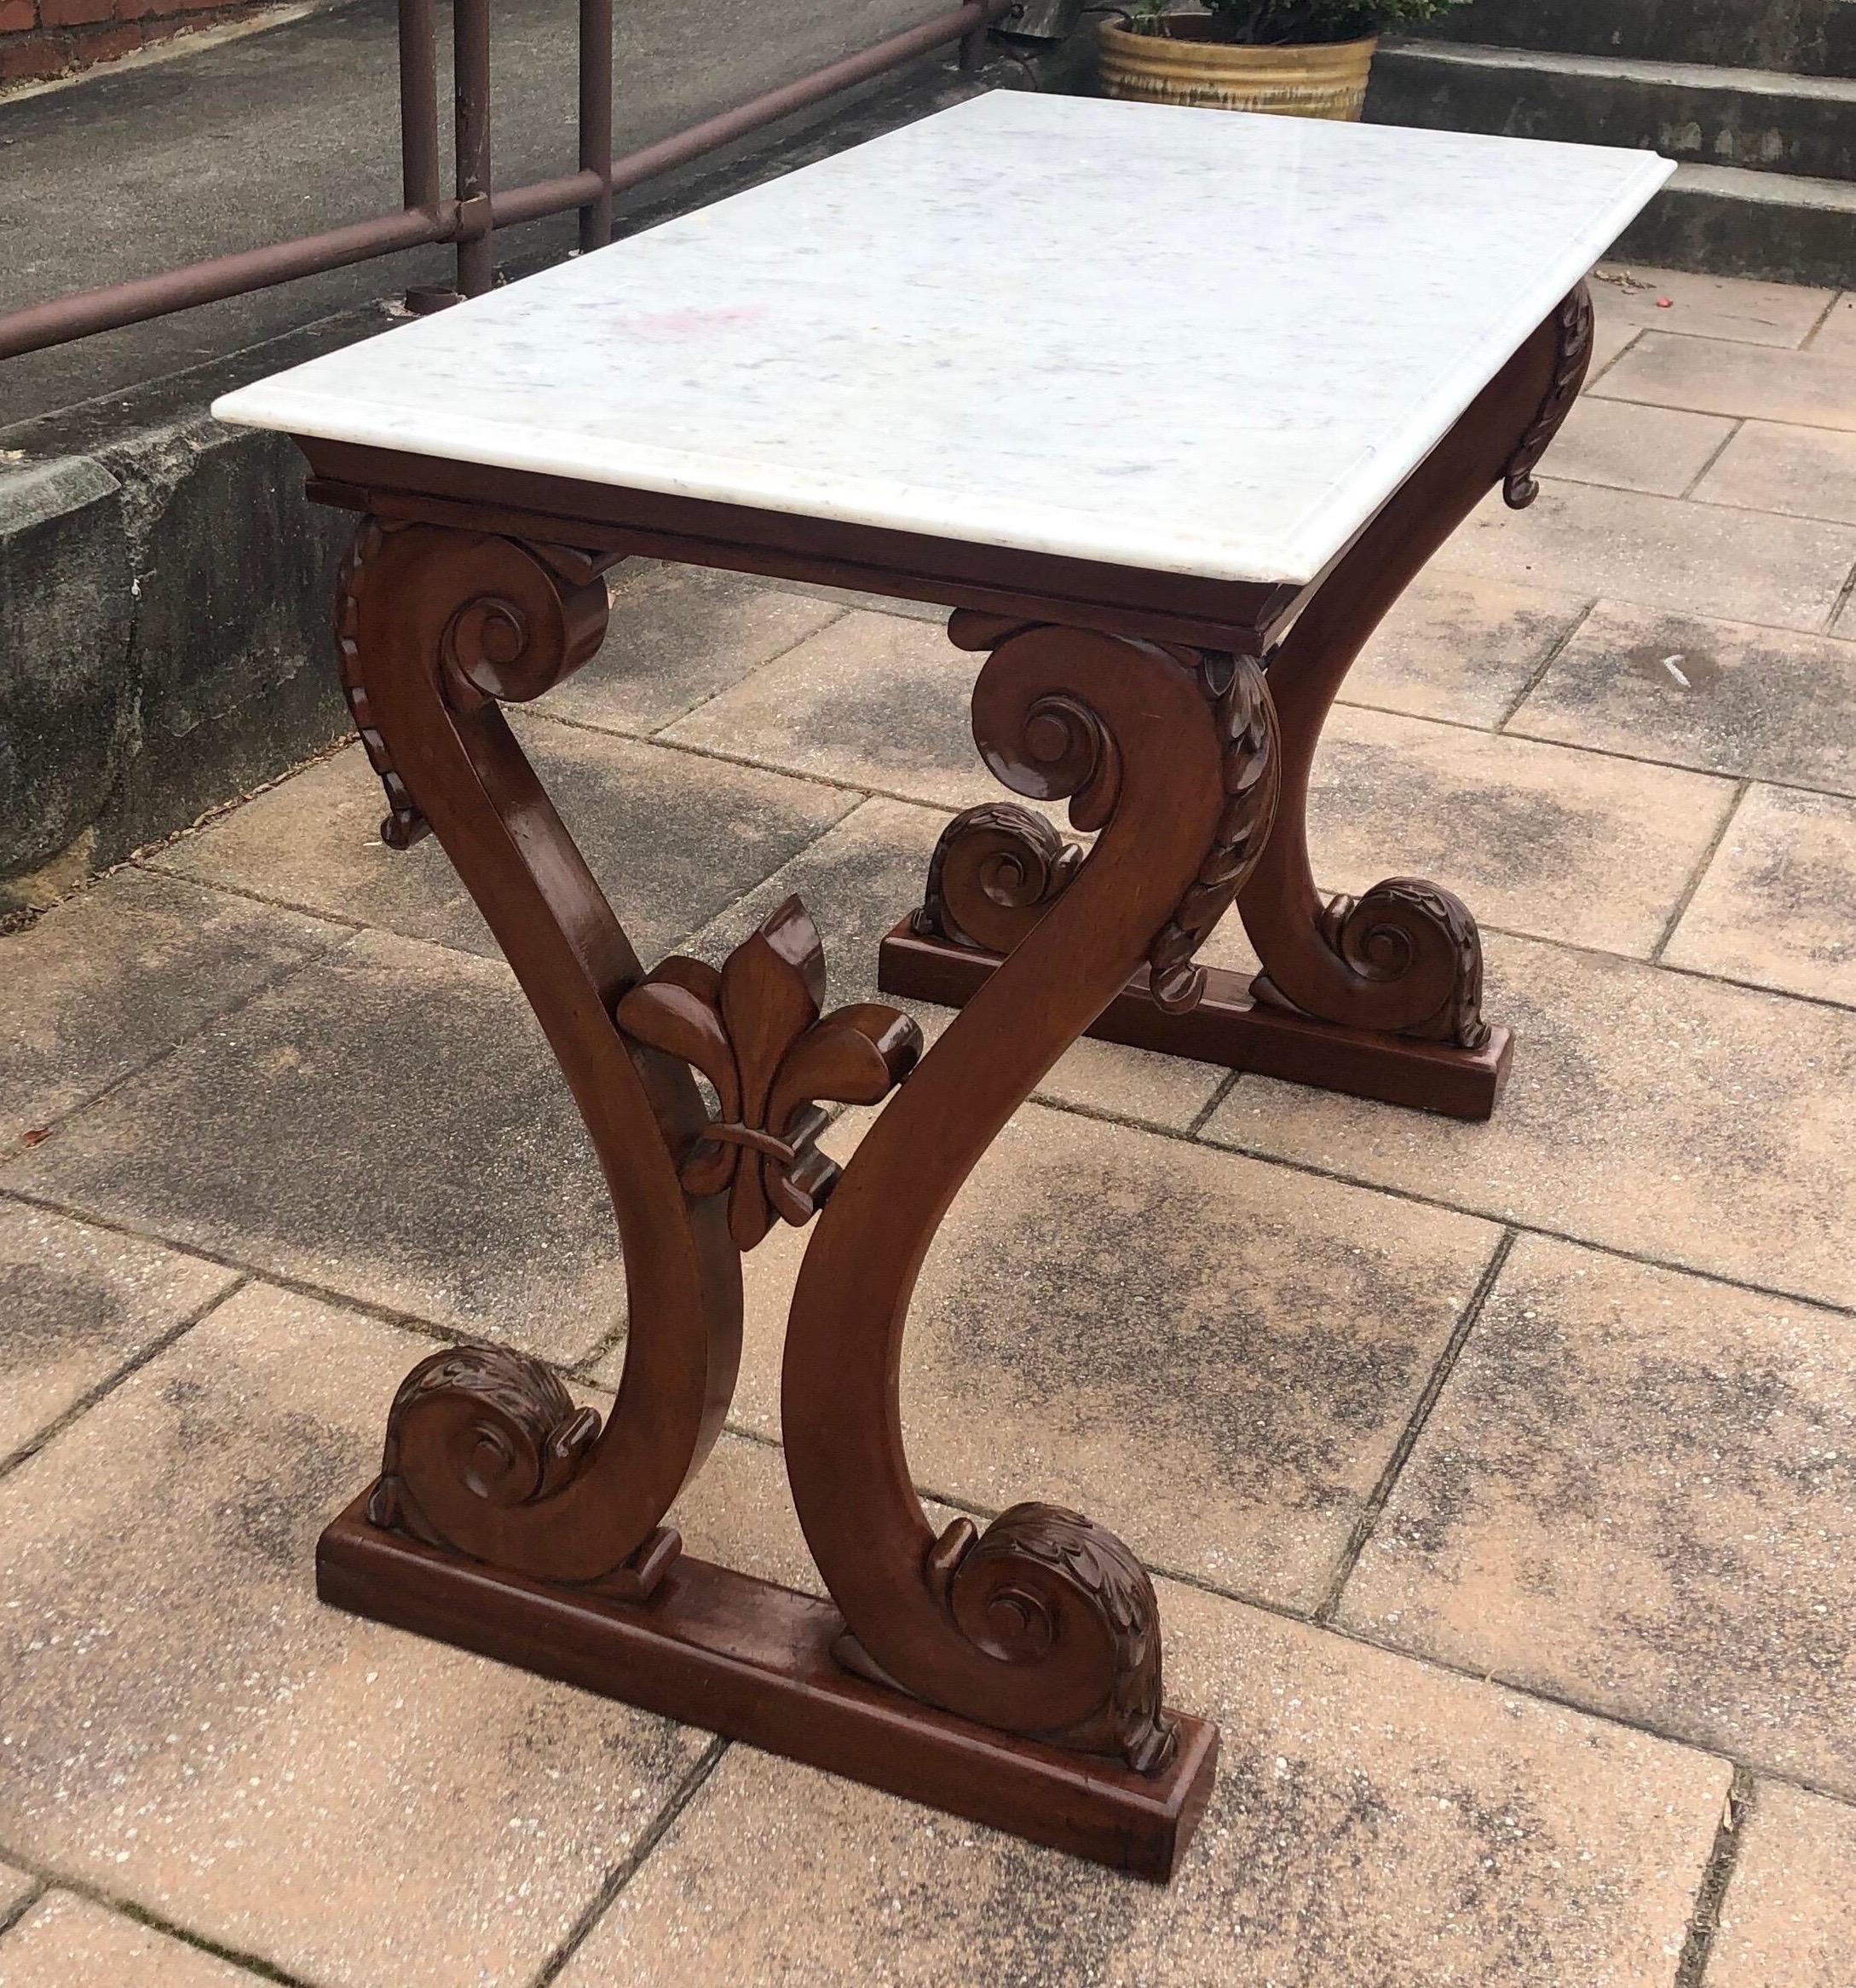 19th century Irish William IV Marble-Top Mahogany Hall Table with Fleur de Lys In Good Condition For Sale In Charleston, SC